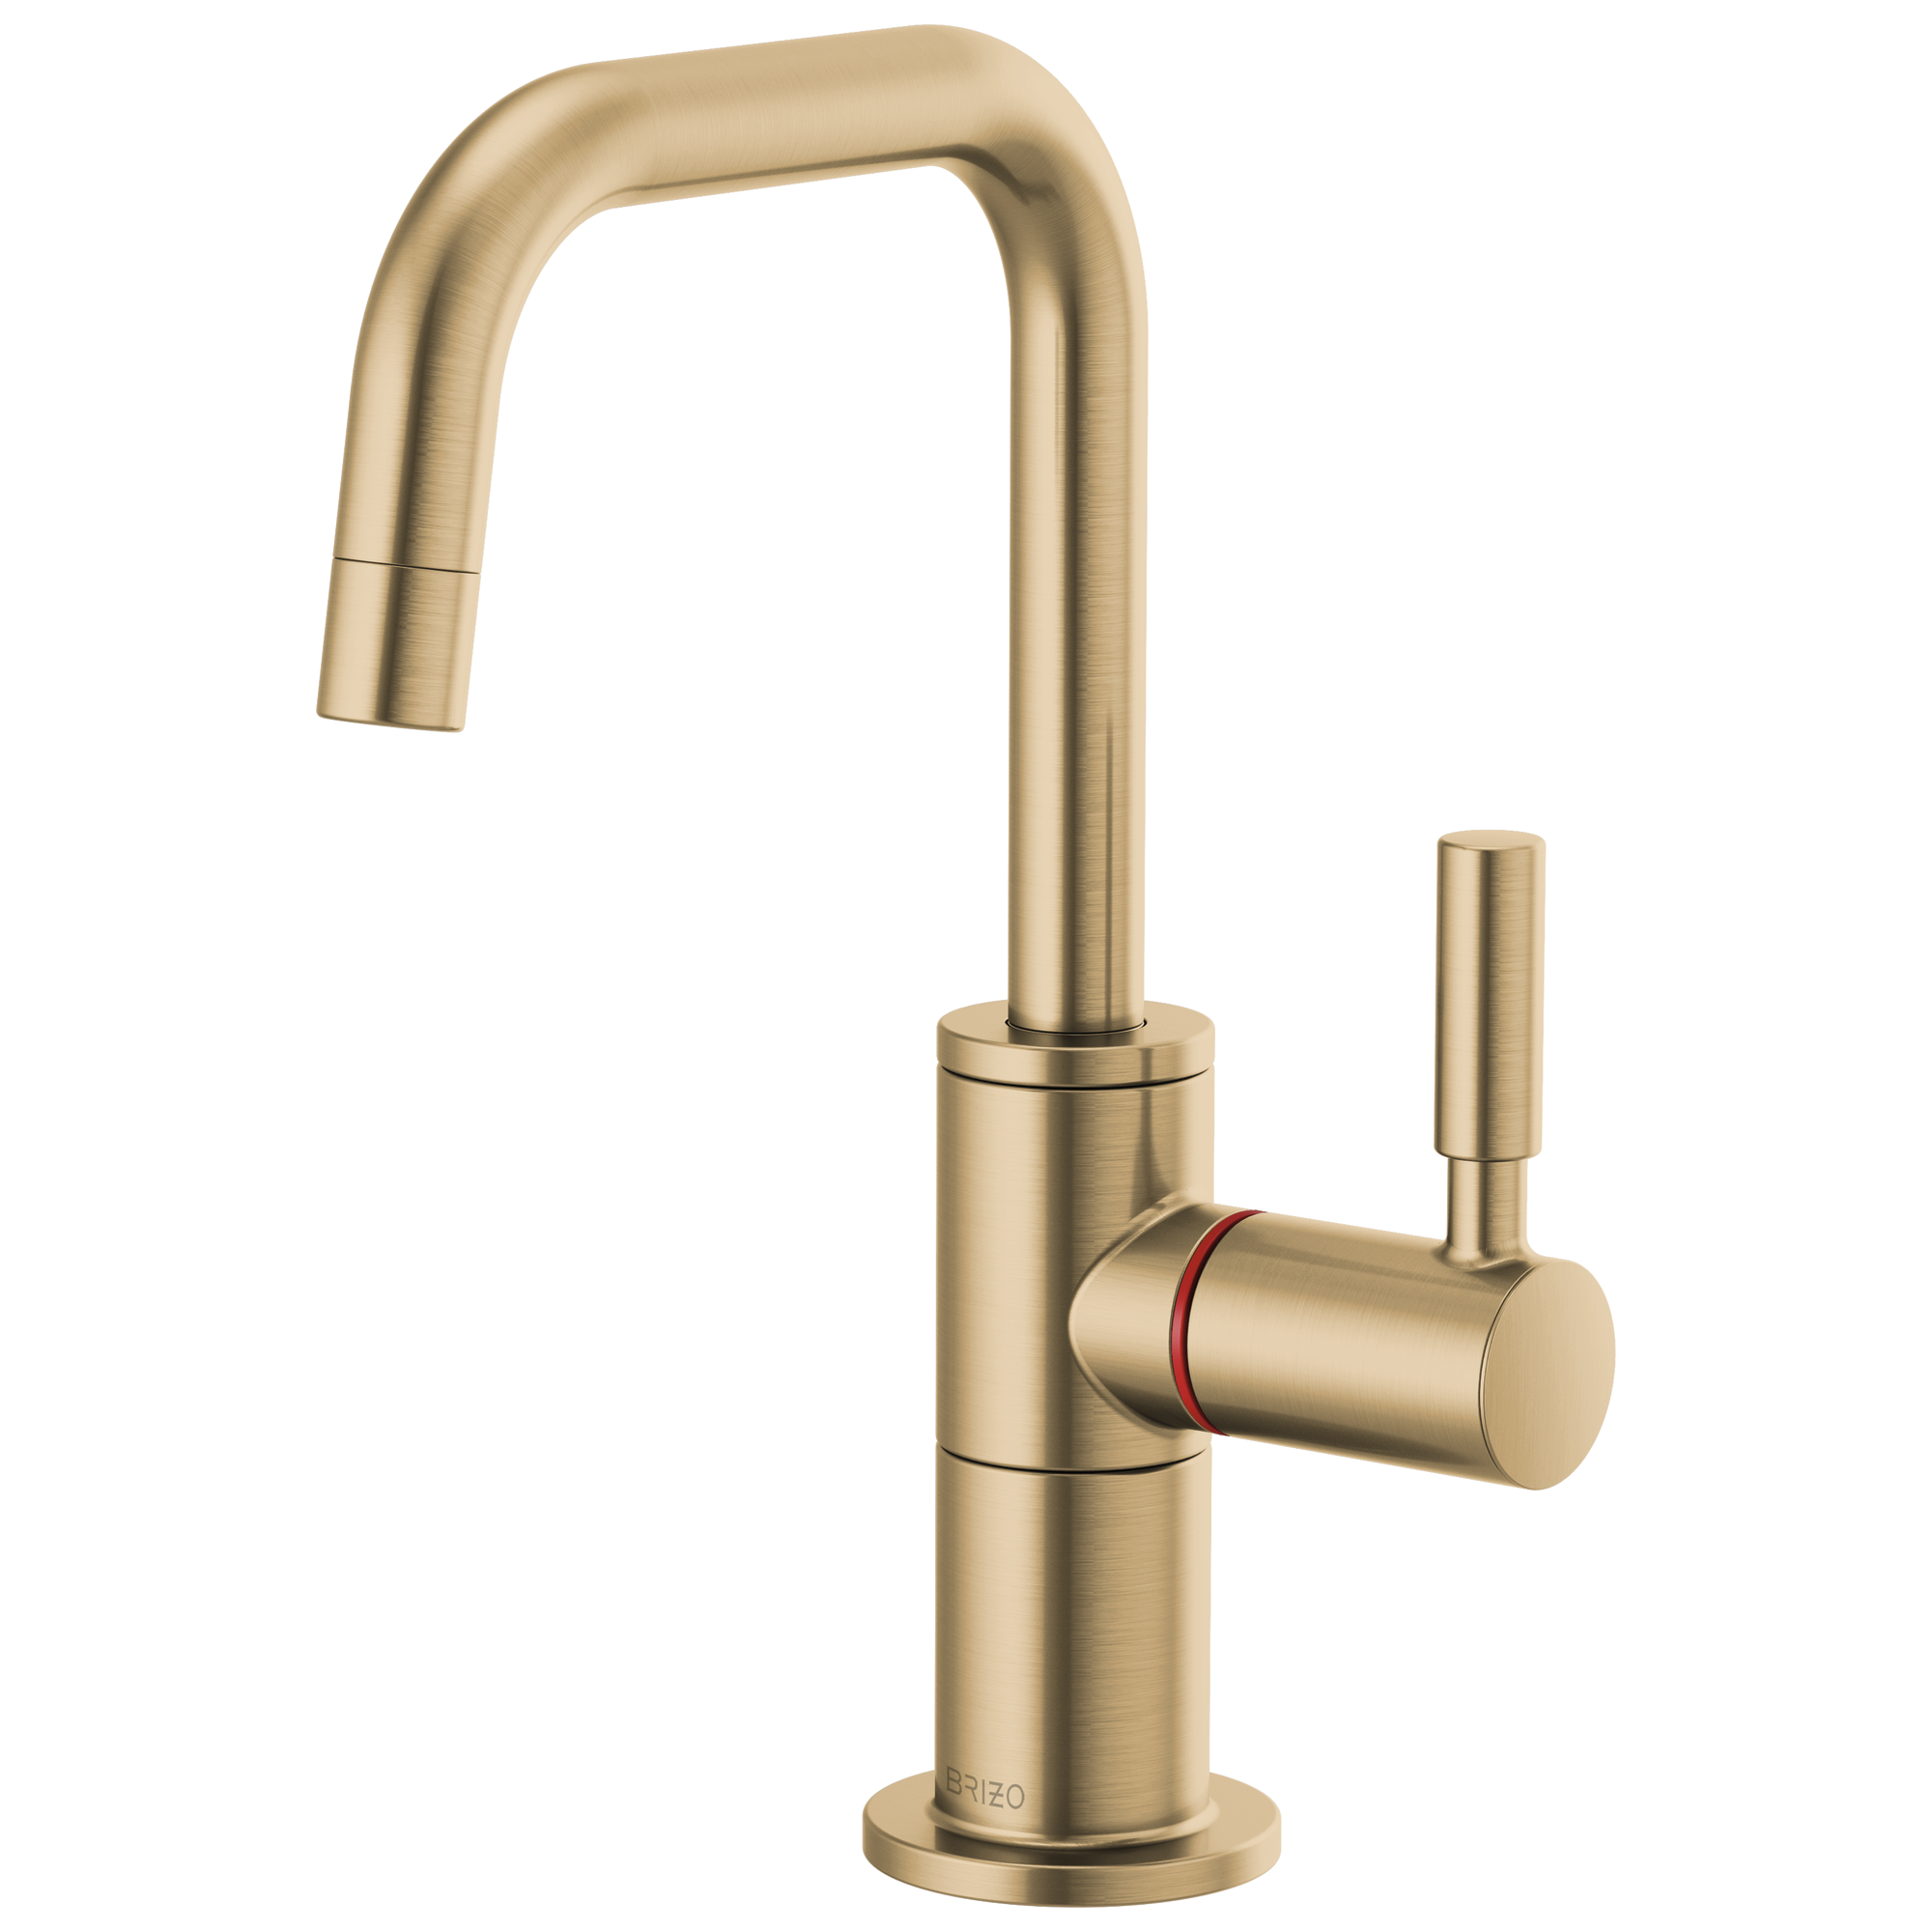 Brizo Solna Instant Hot Faucet with Square Spout